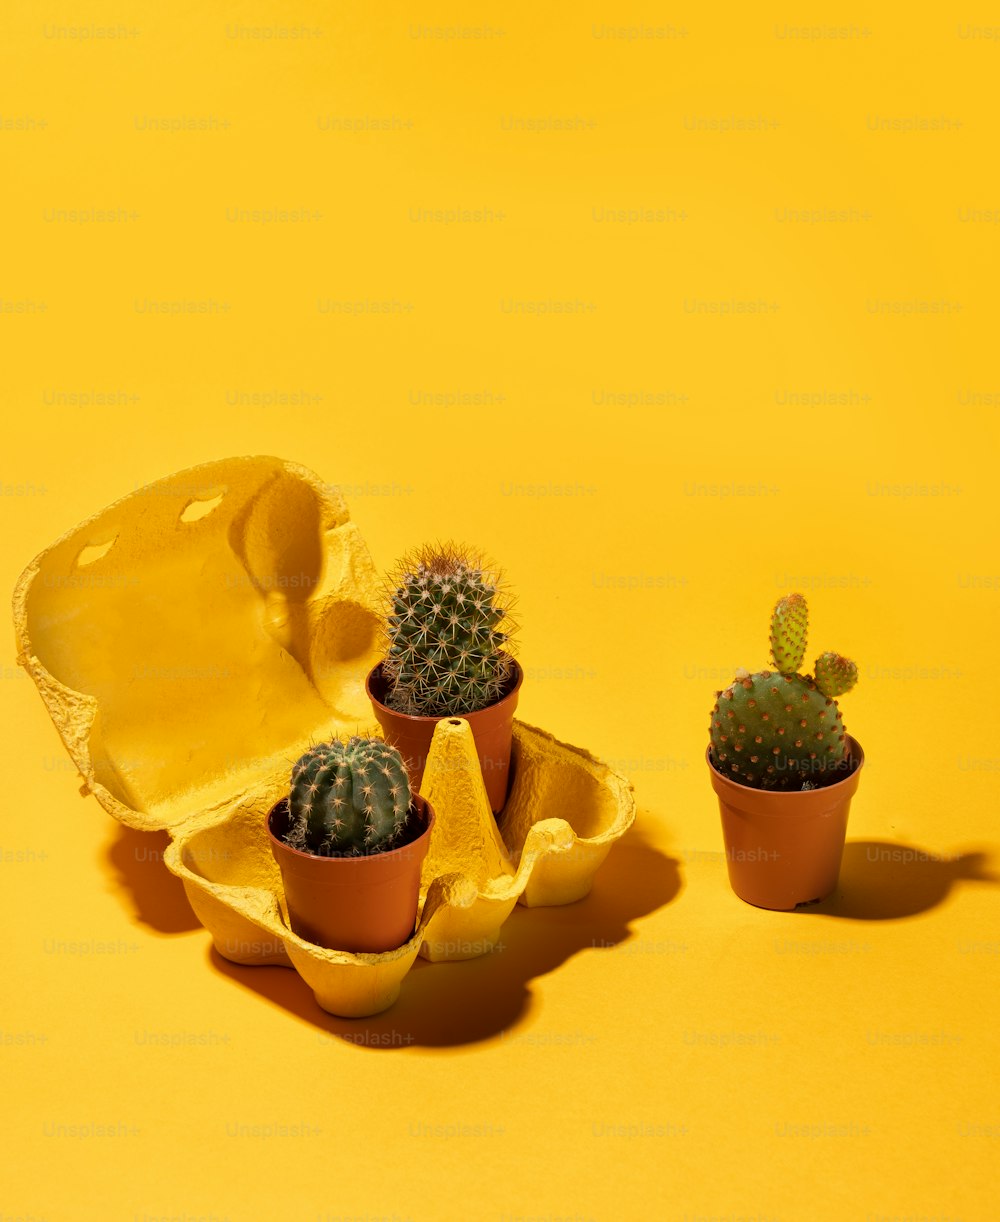 three small cactus plants in small clay pots